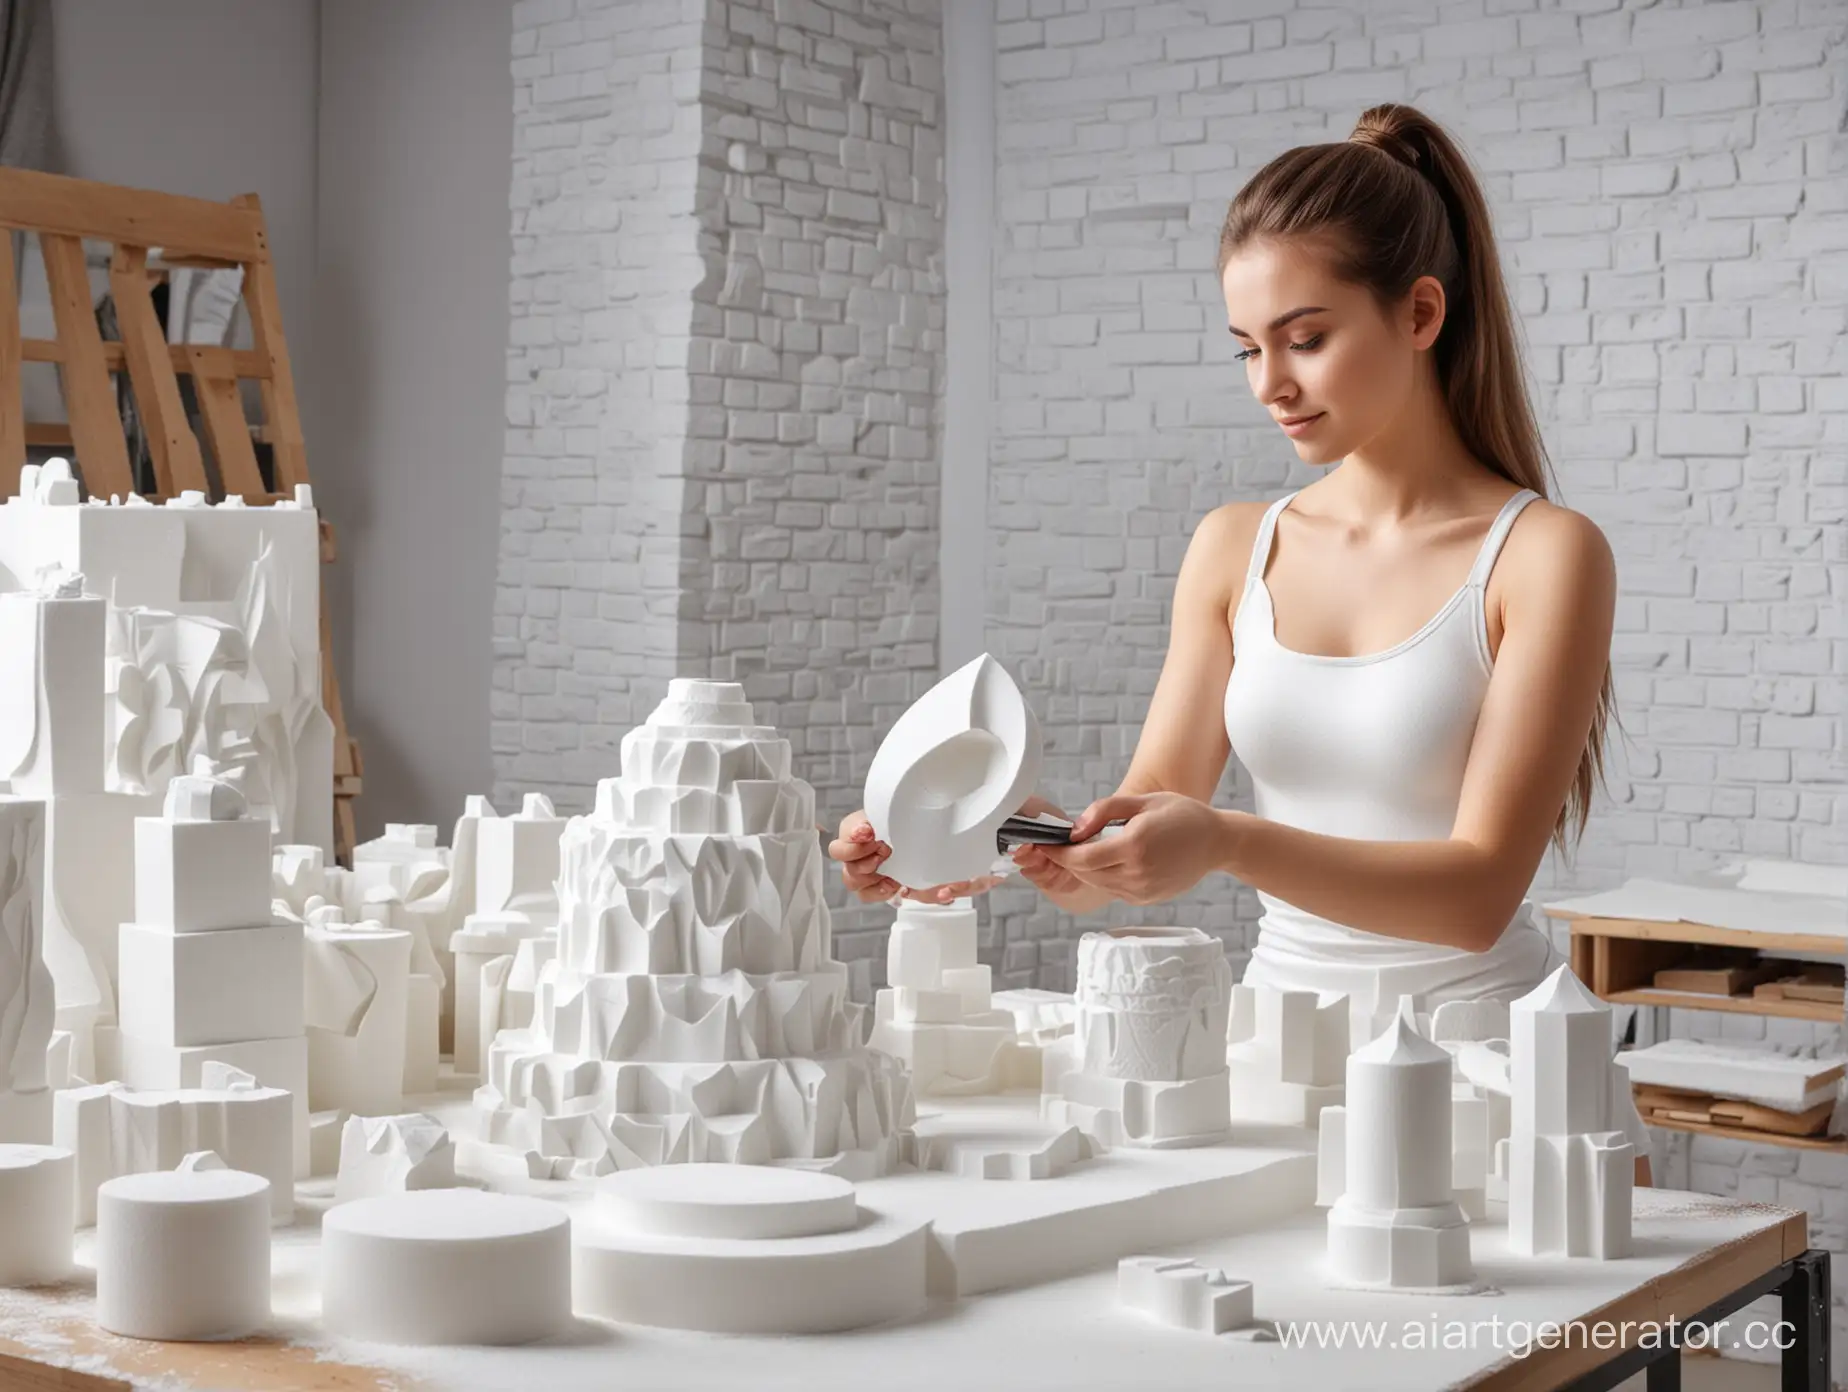 Crafting-Volumetric-White-Foam-Figures-A-Workshop-Scene-with-a-Skilled-Beauty-Operating-CNC-Machinery